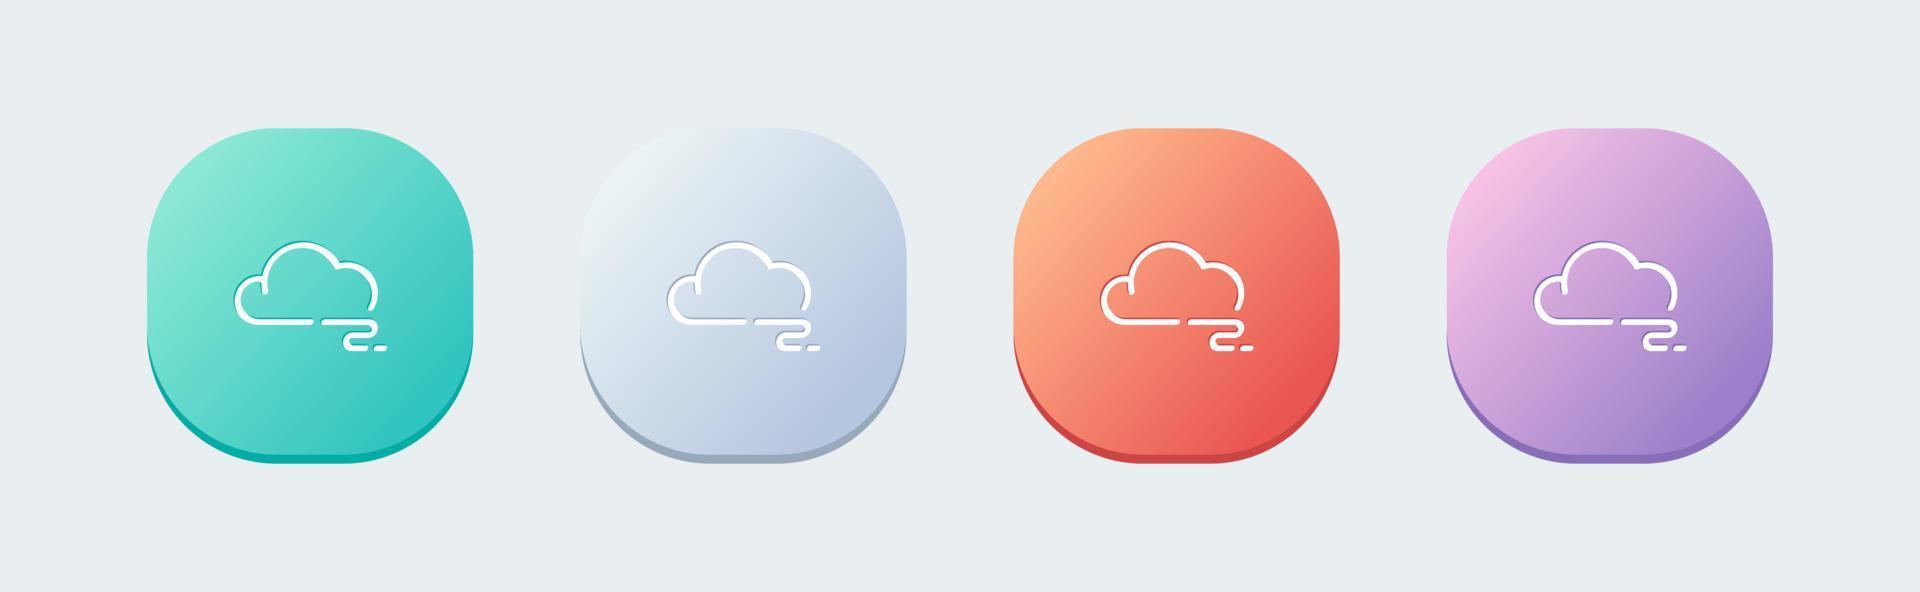 Foggy line icon in flat design style. Weather signs vector illustration.